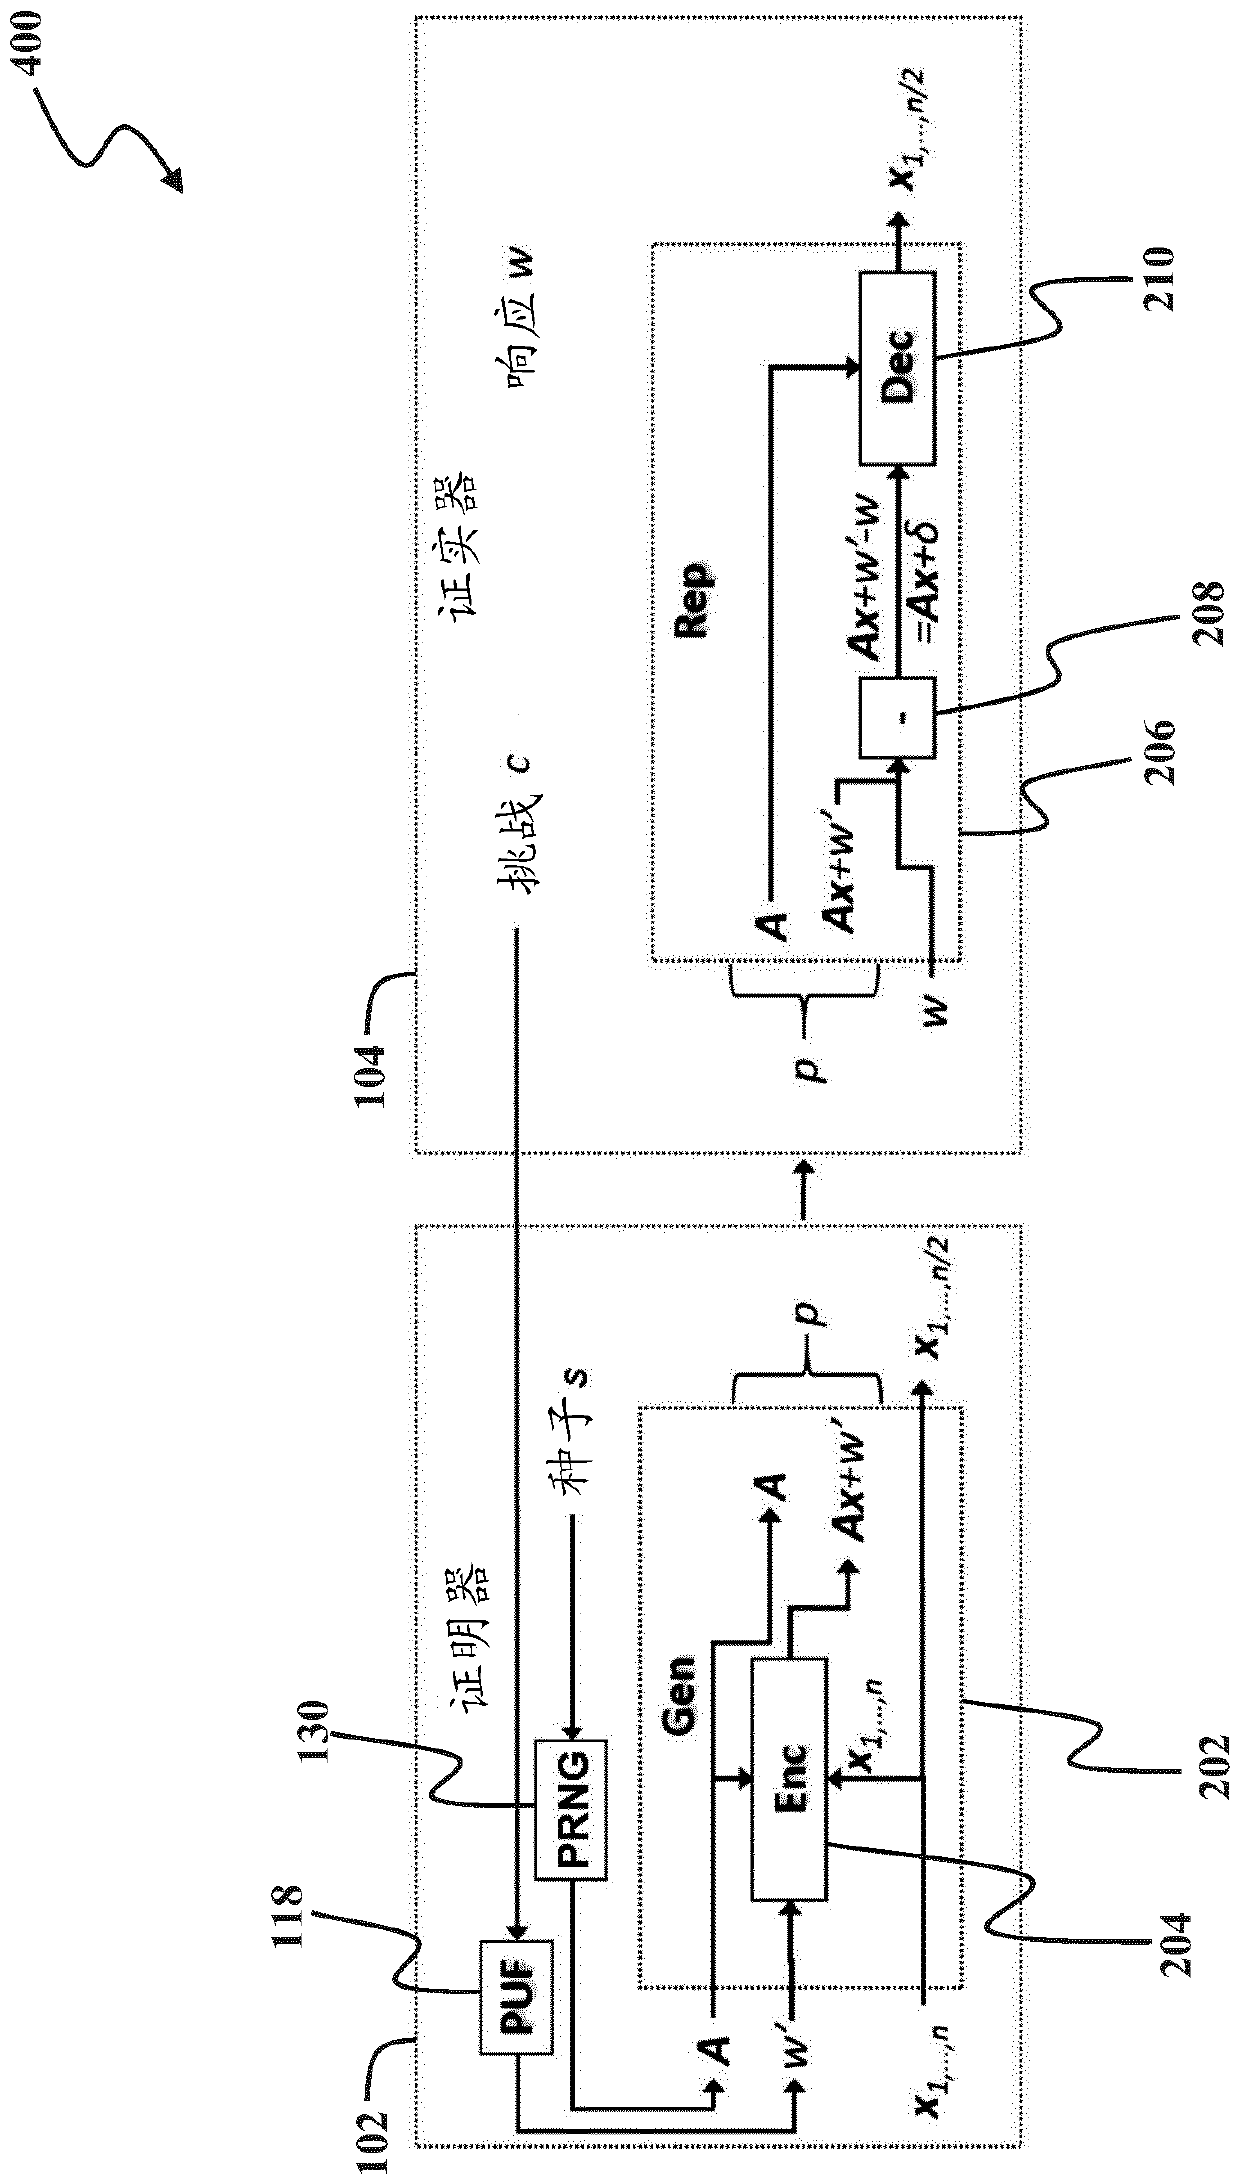 Pseudo-random generation of matrices for computational fuzzy extractor and method for authentication